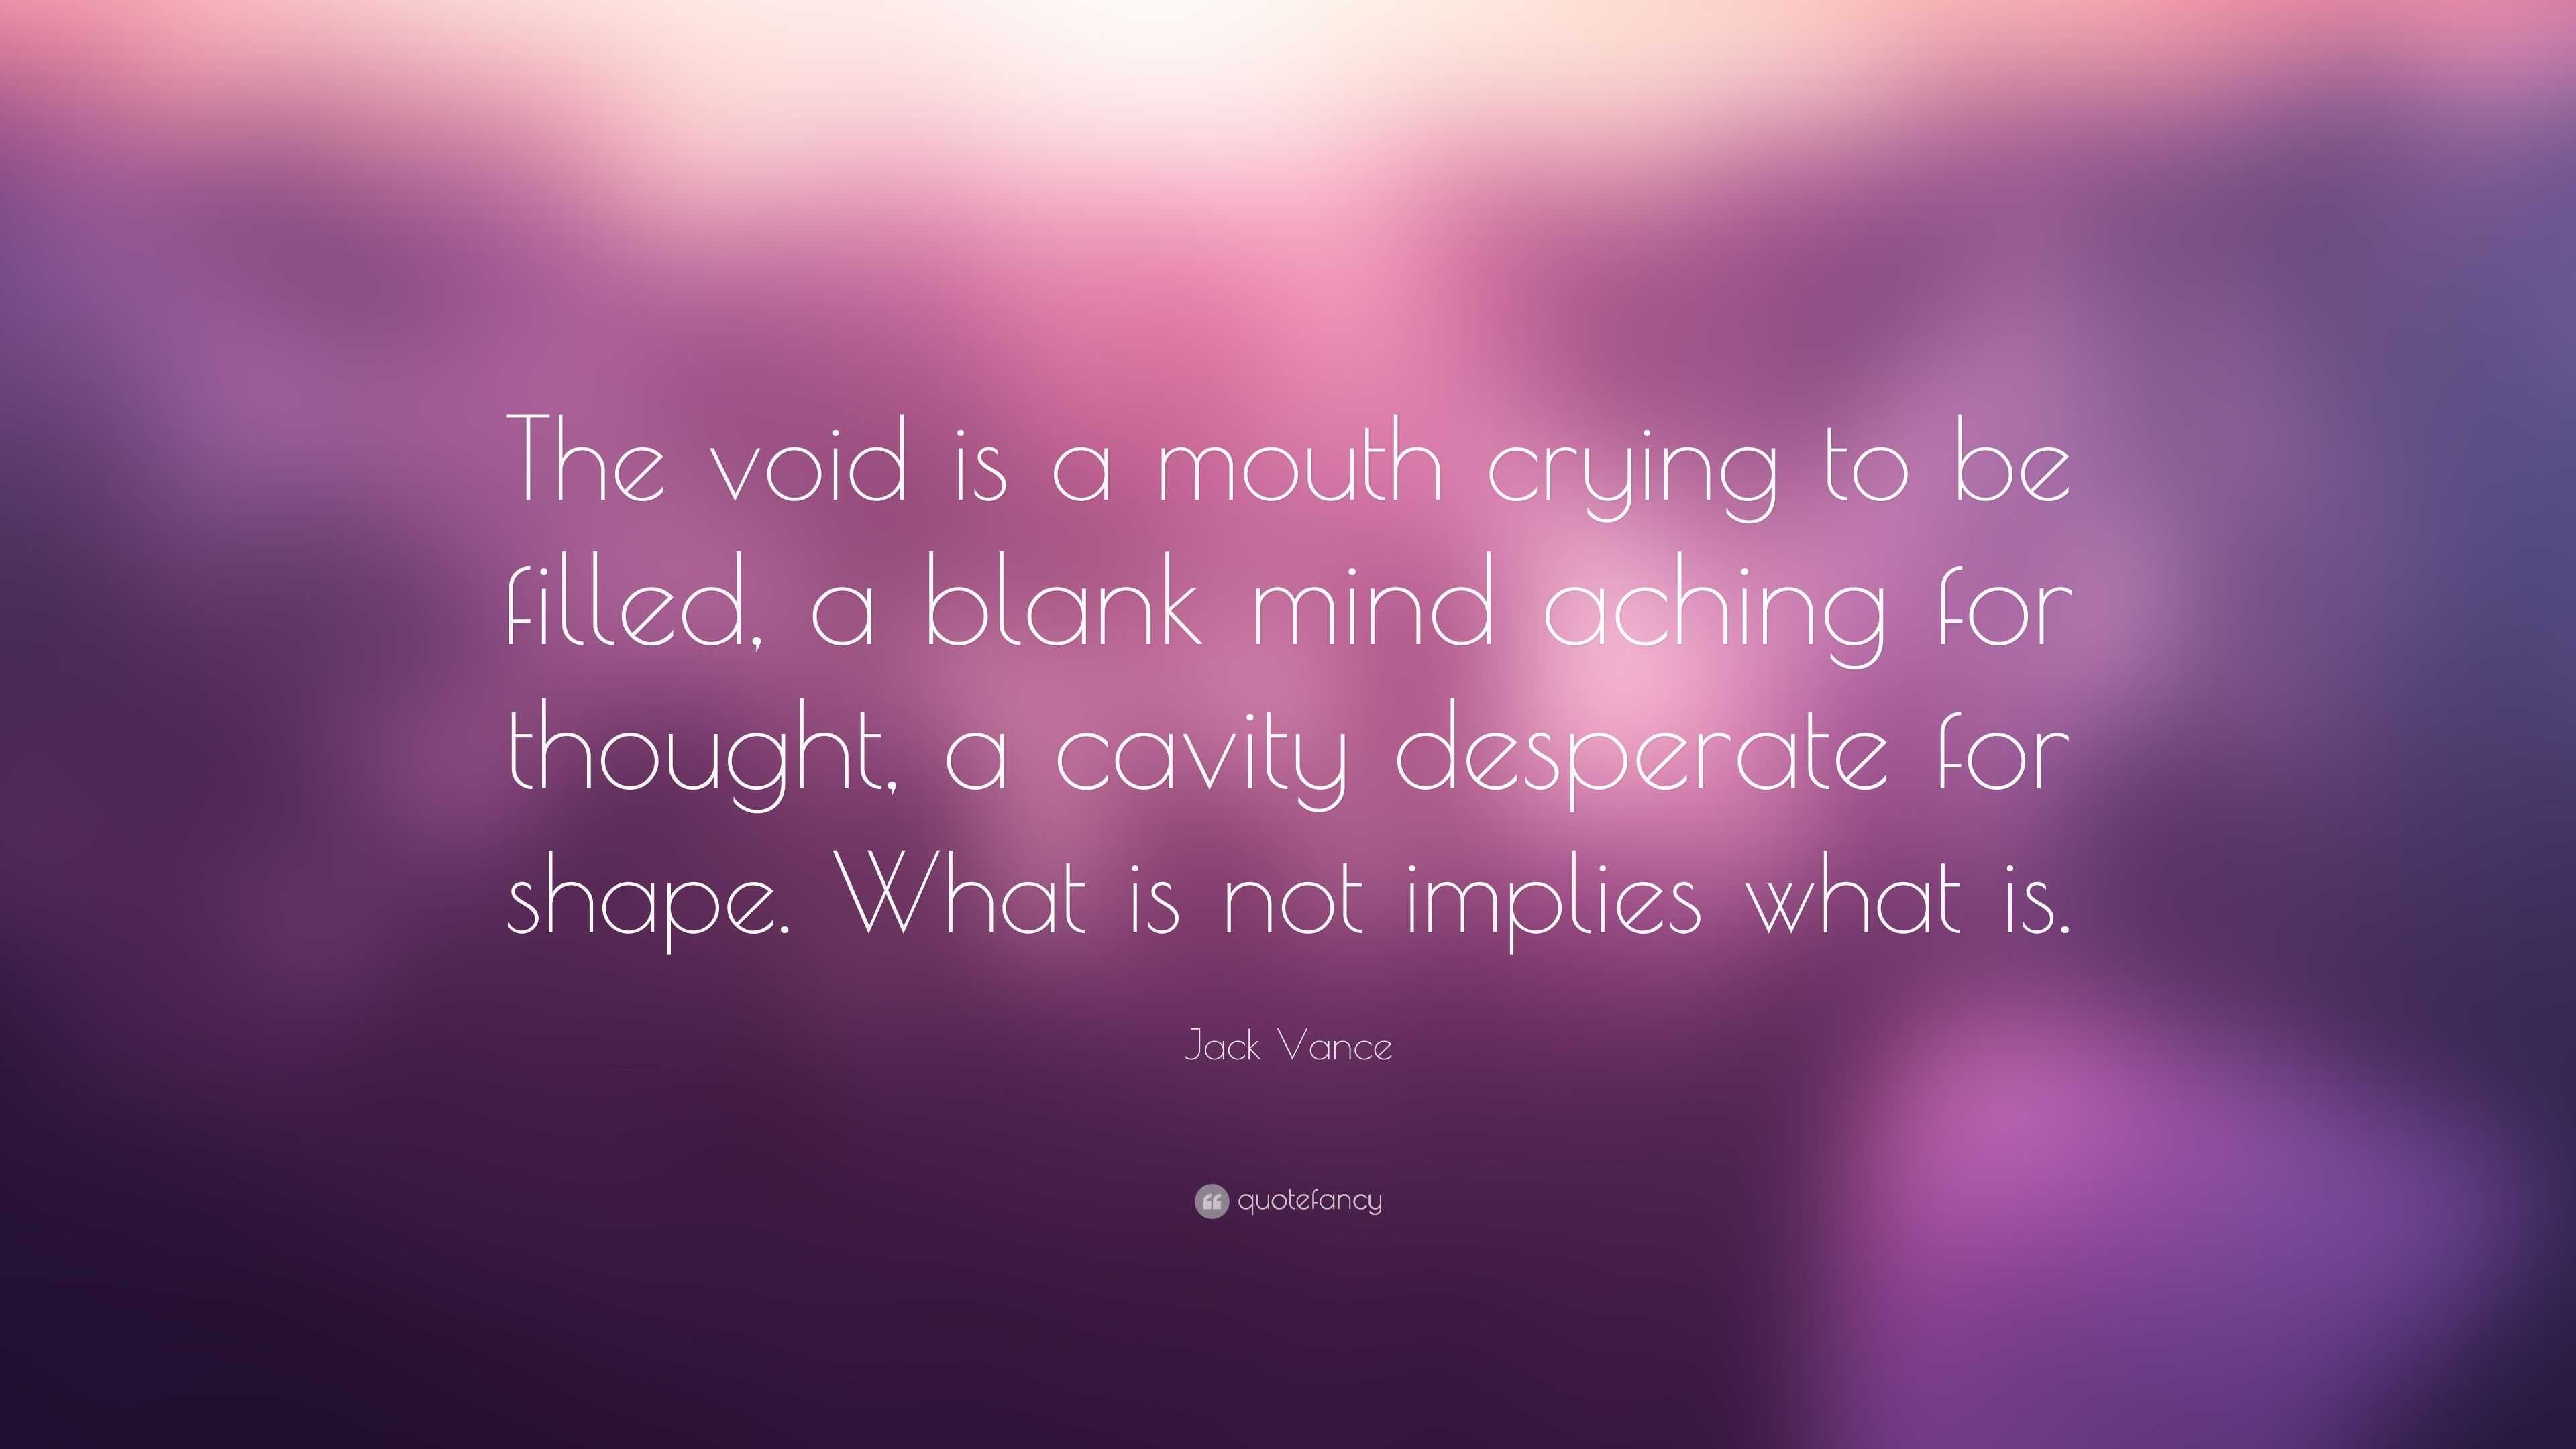 Void Character Quotes. QuotesGram